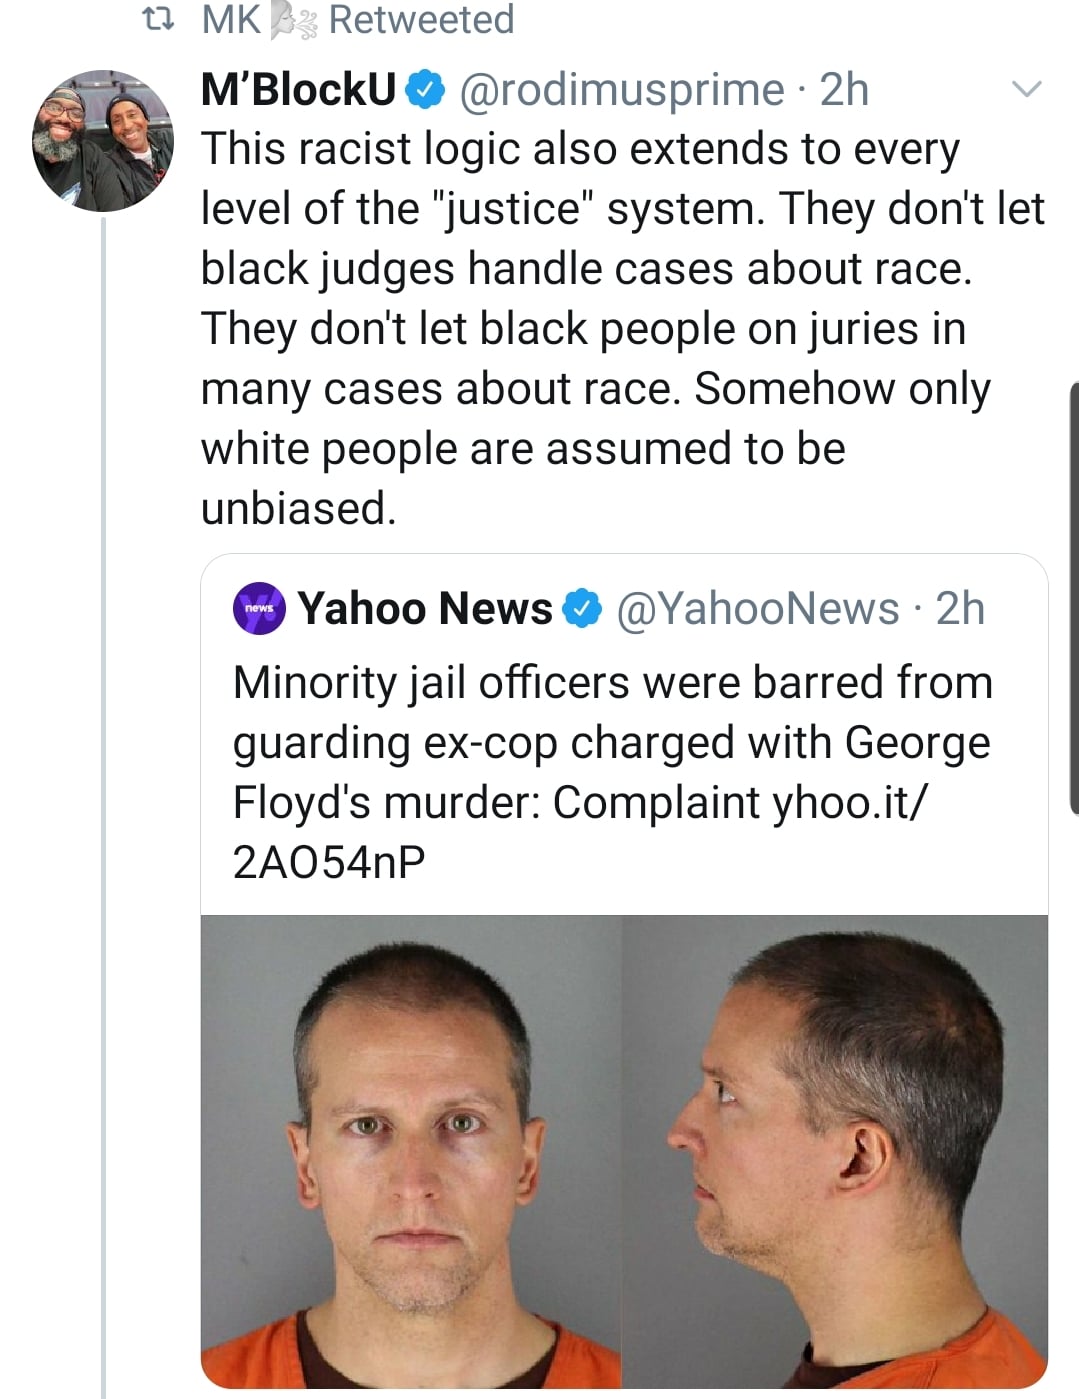 Tweets, Senate, George Floyd Black Twitter Memes Tweets, Senate, George Floyd text: MK Retweeted @rodimusprime • 2h M'BlockU This racist logic also extends to every level of the 